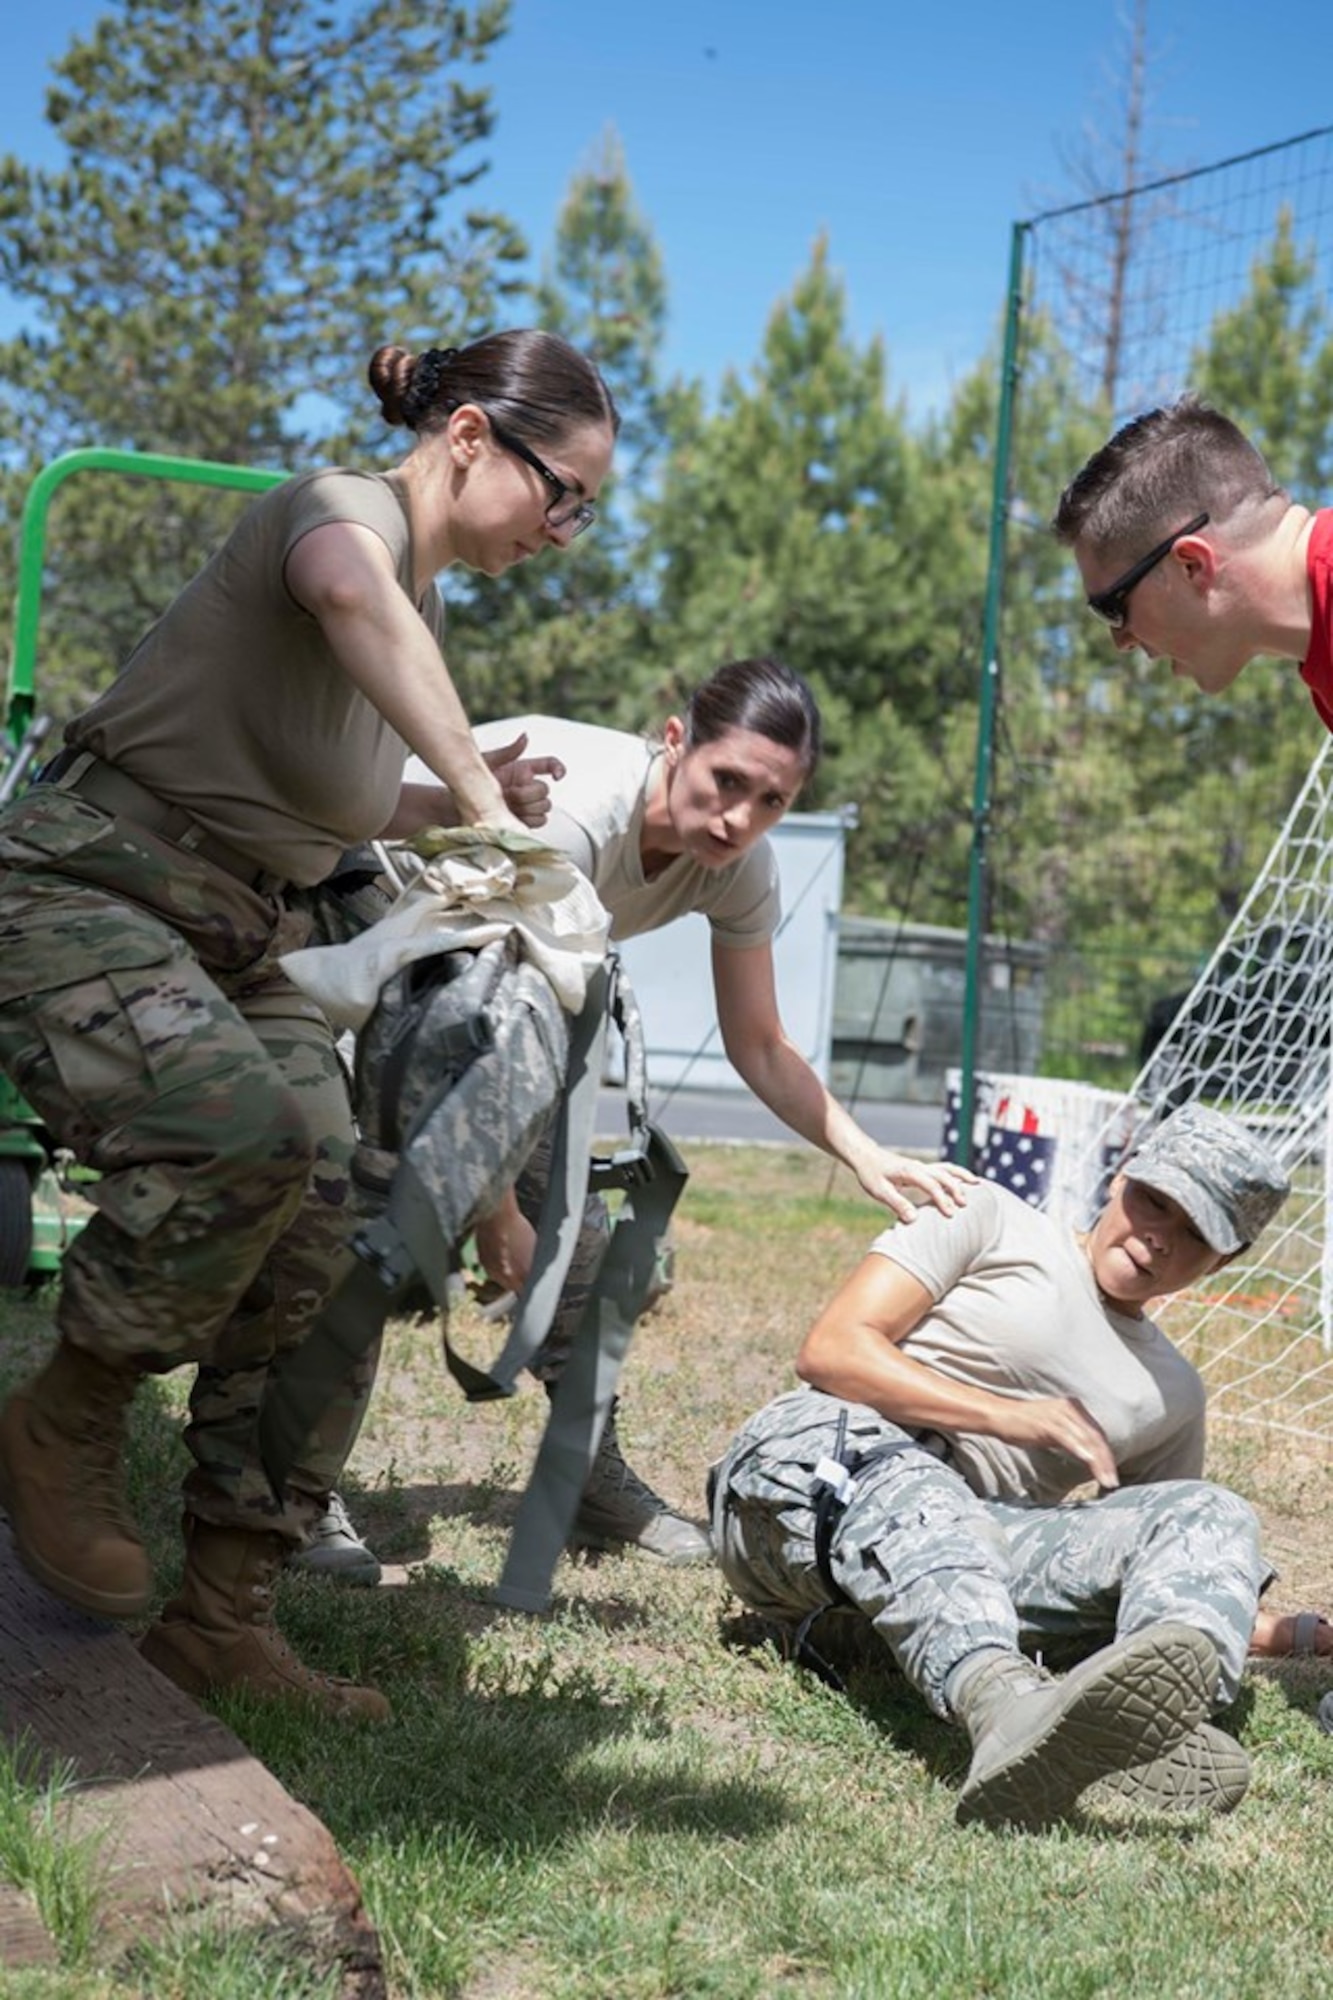 Members of the 149th Medical Group participate in Tactical Combat Casualty Care training at Coast Guard Station Lake Tahoe, Nev. June 16, 2019.